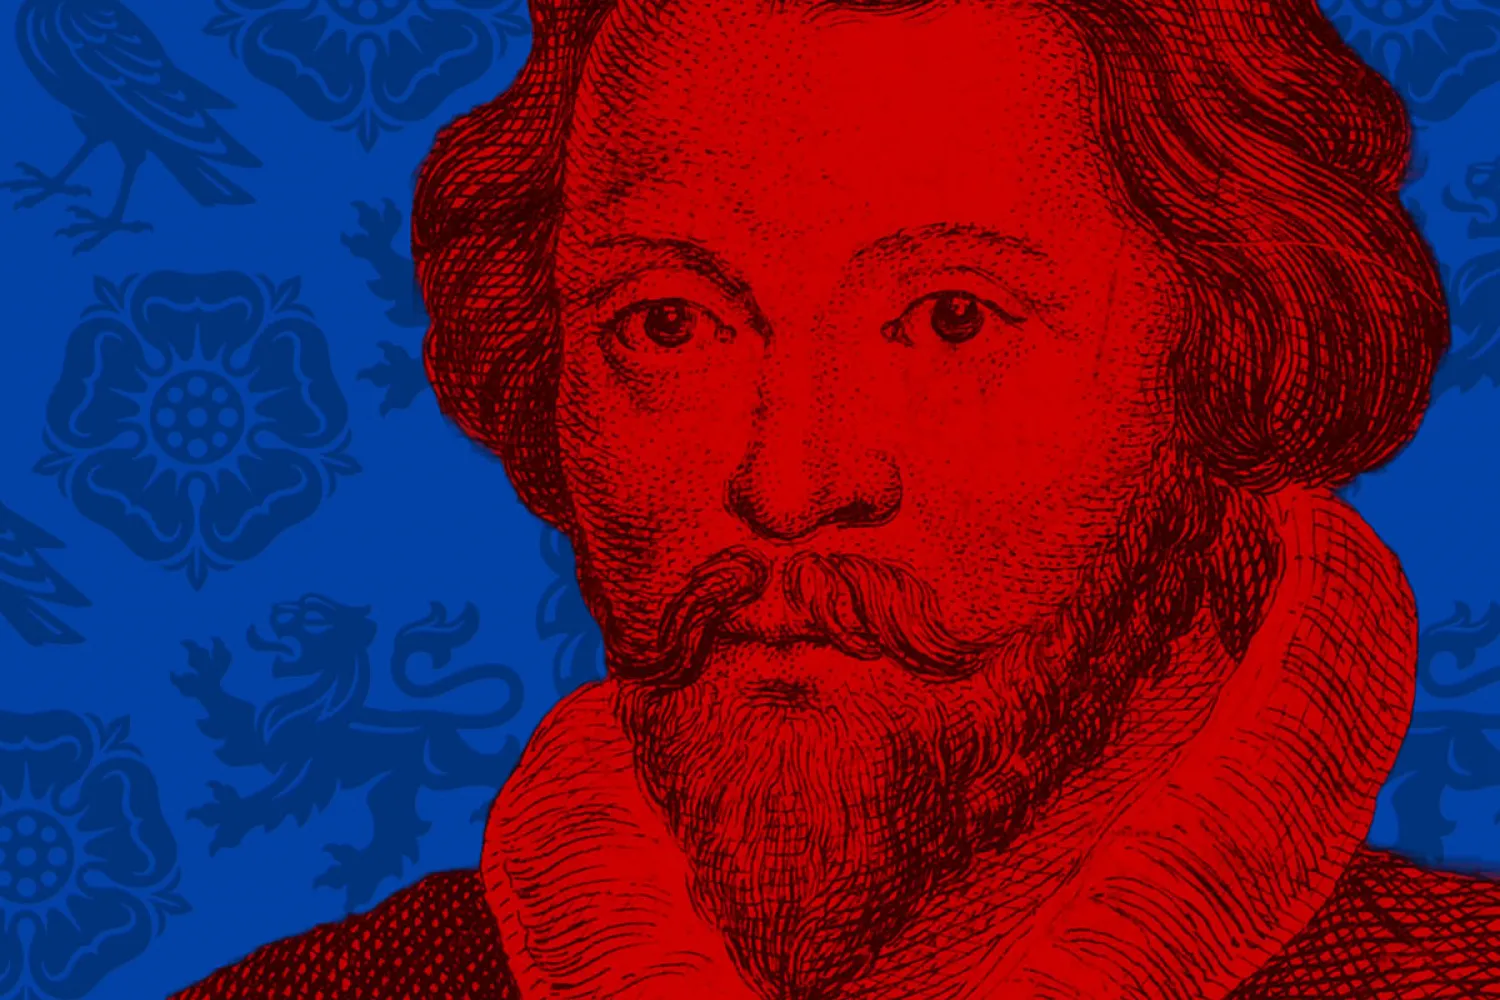 William Byrd in red and blue